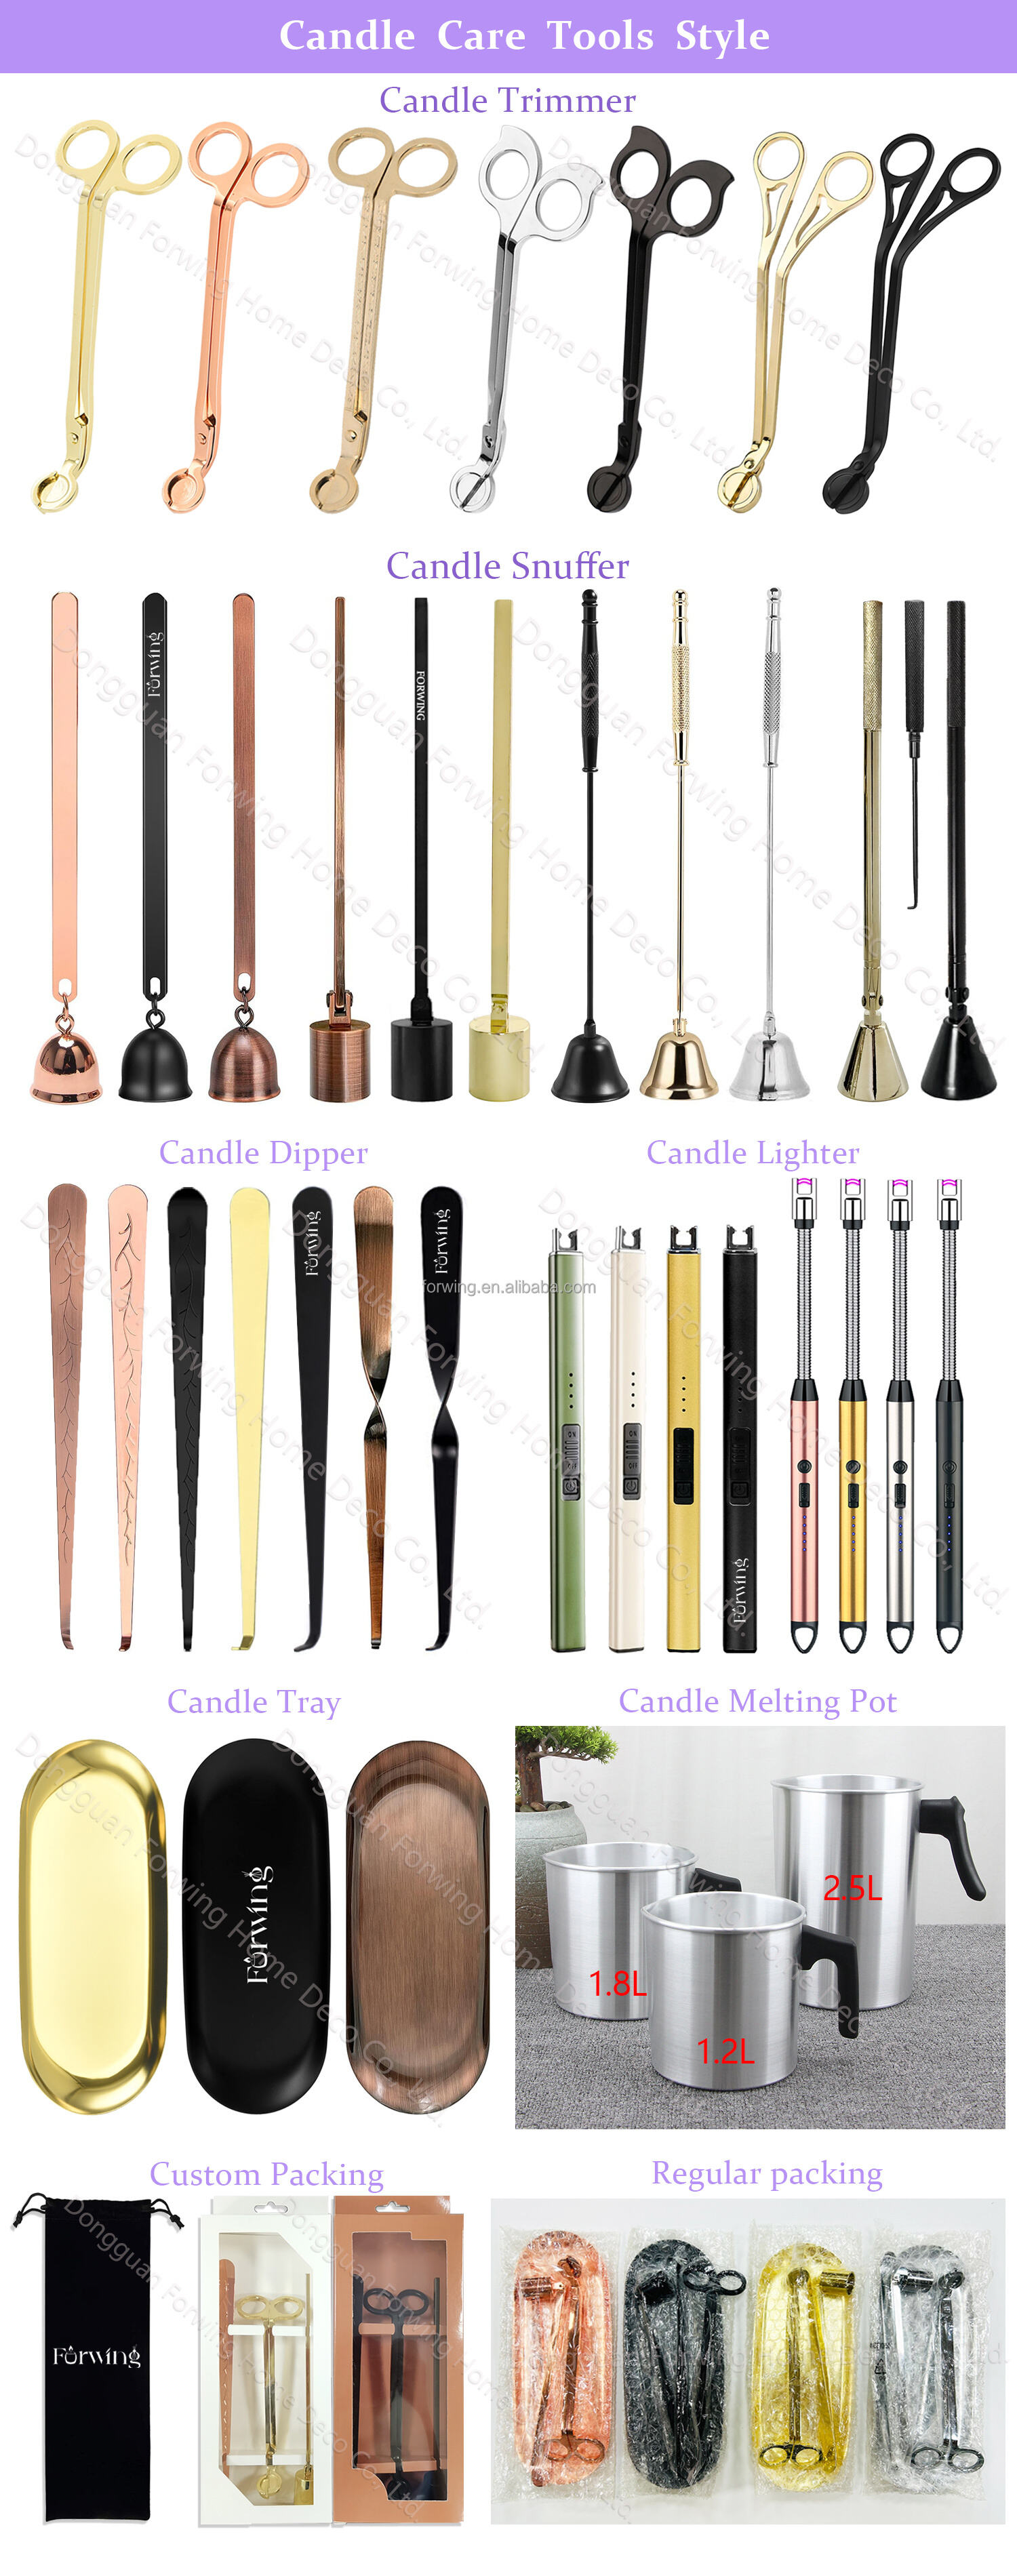 Candle Care Tools Set Candle Wick Trimmer Scissors Dipper Snuffer Tray Gold Black Silver Candle Accessories Set manufacture